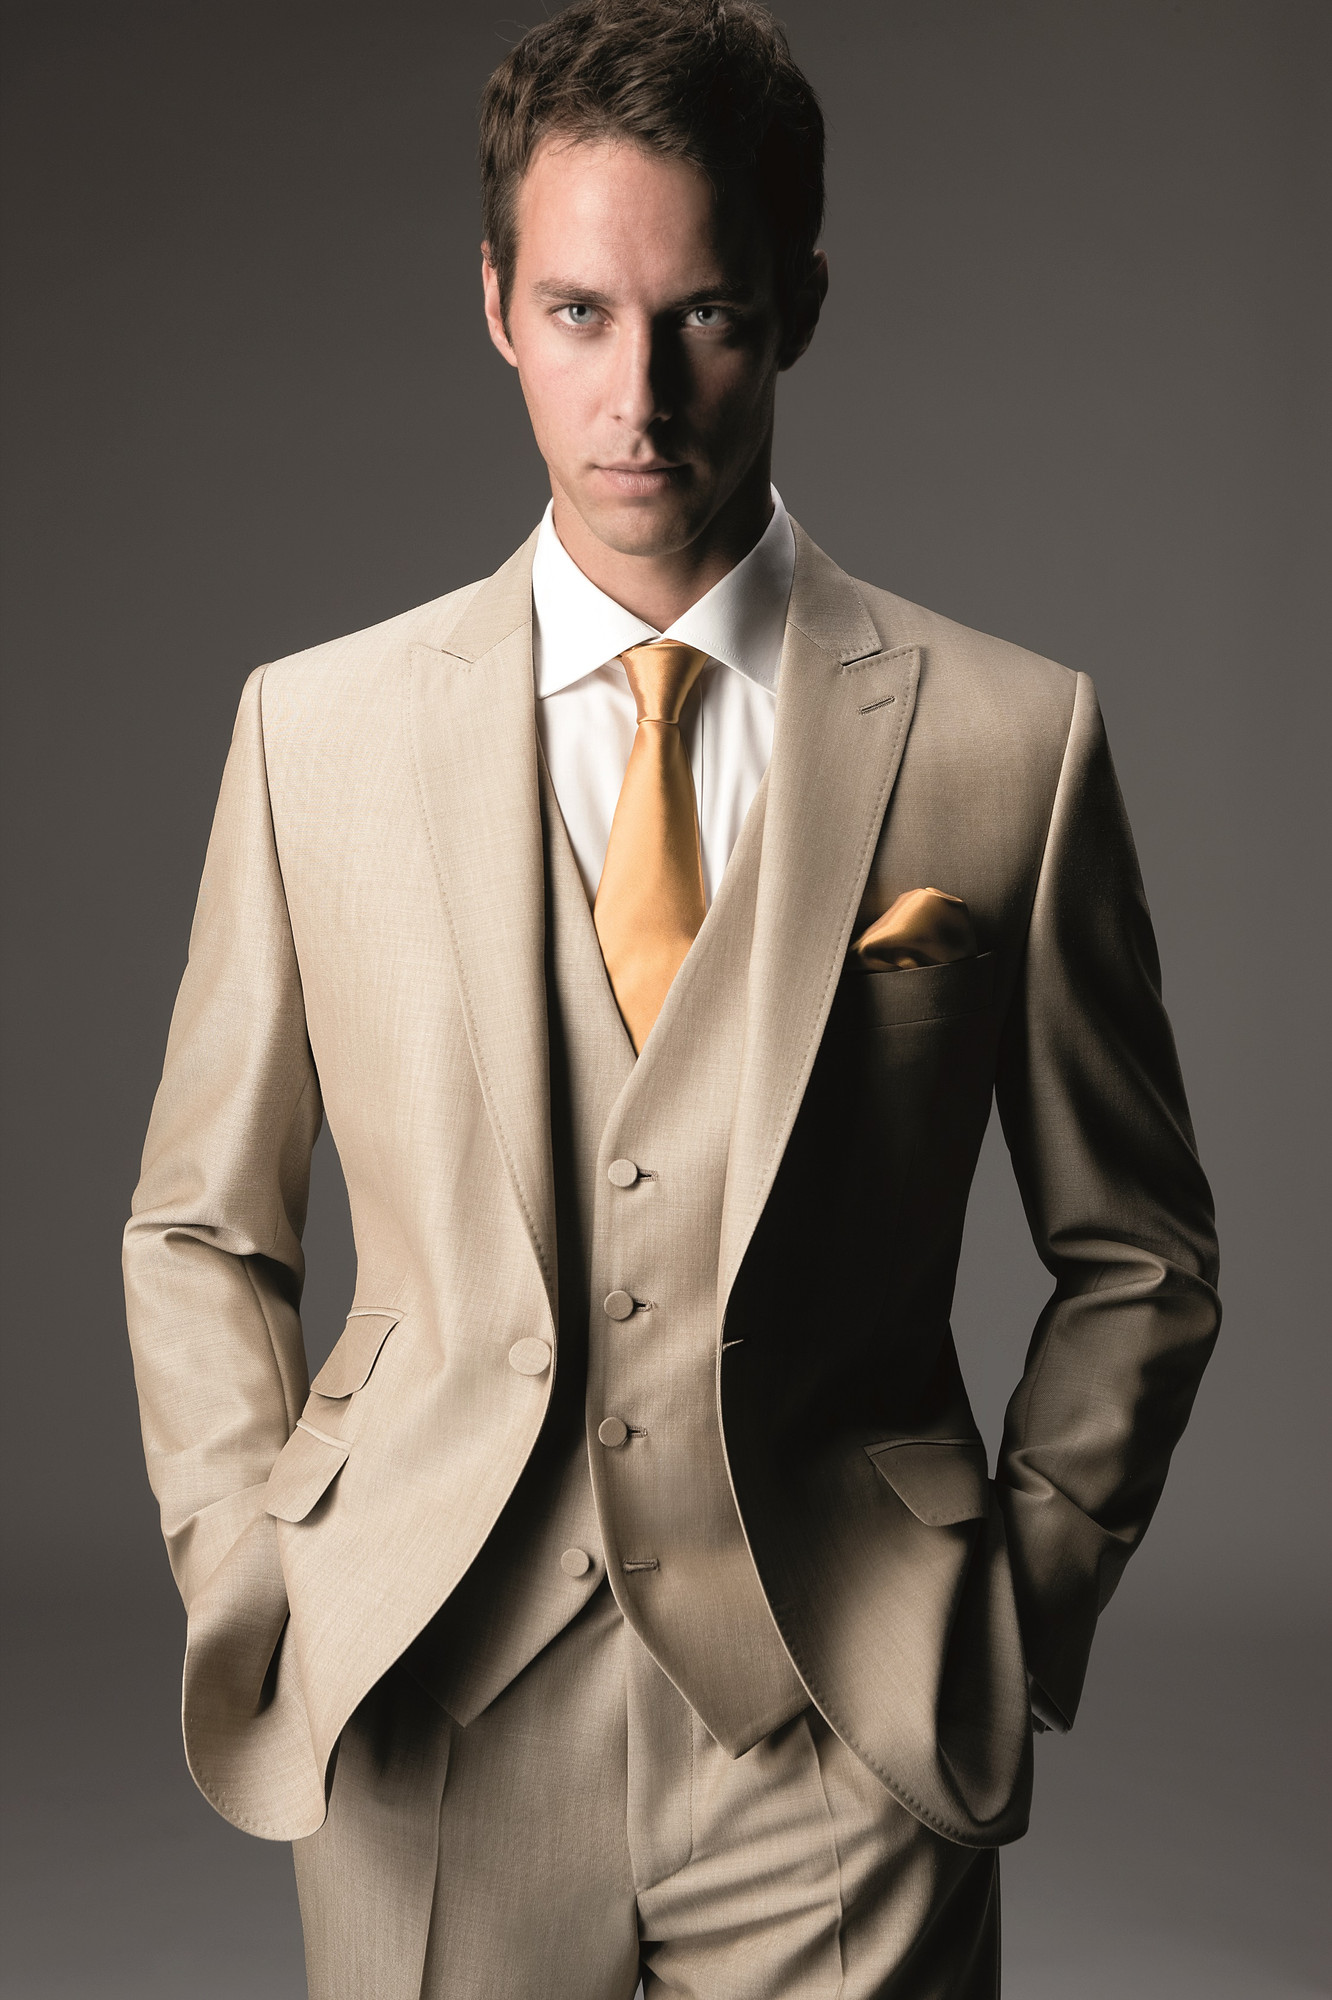 Beige Mohair Mens Wedding Suit from K.M. Lowry - hitched.co.uk